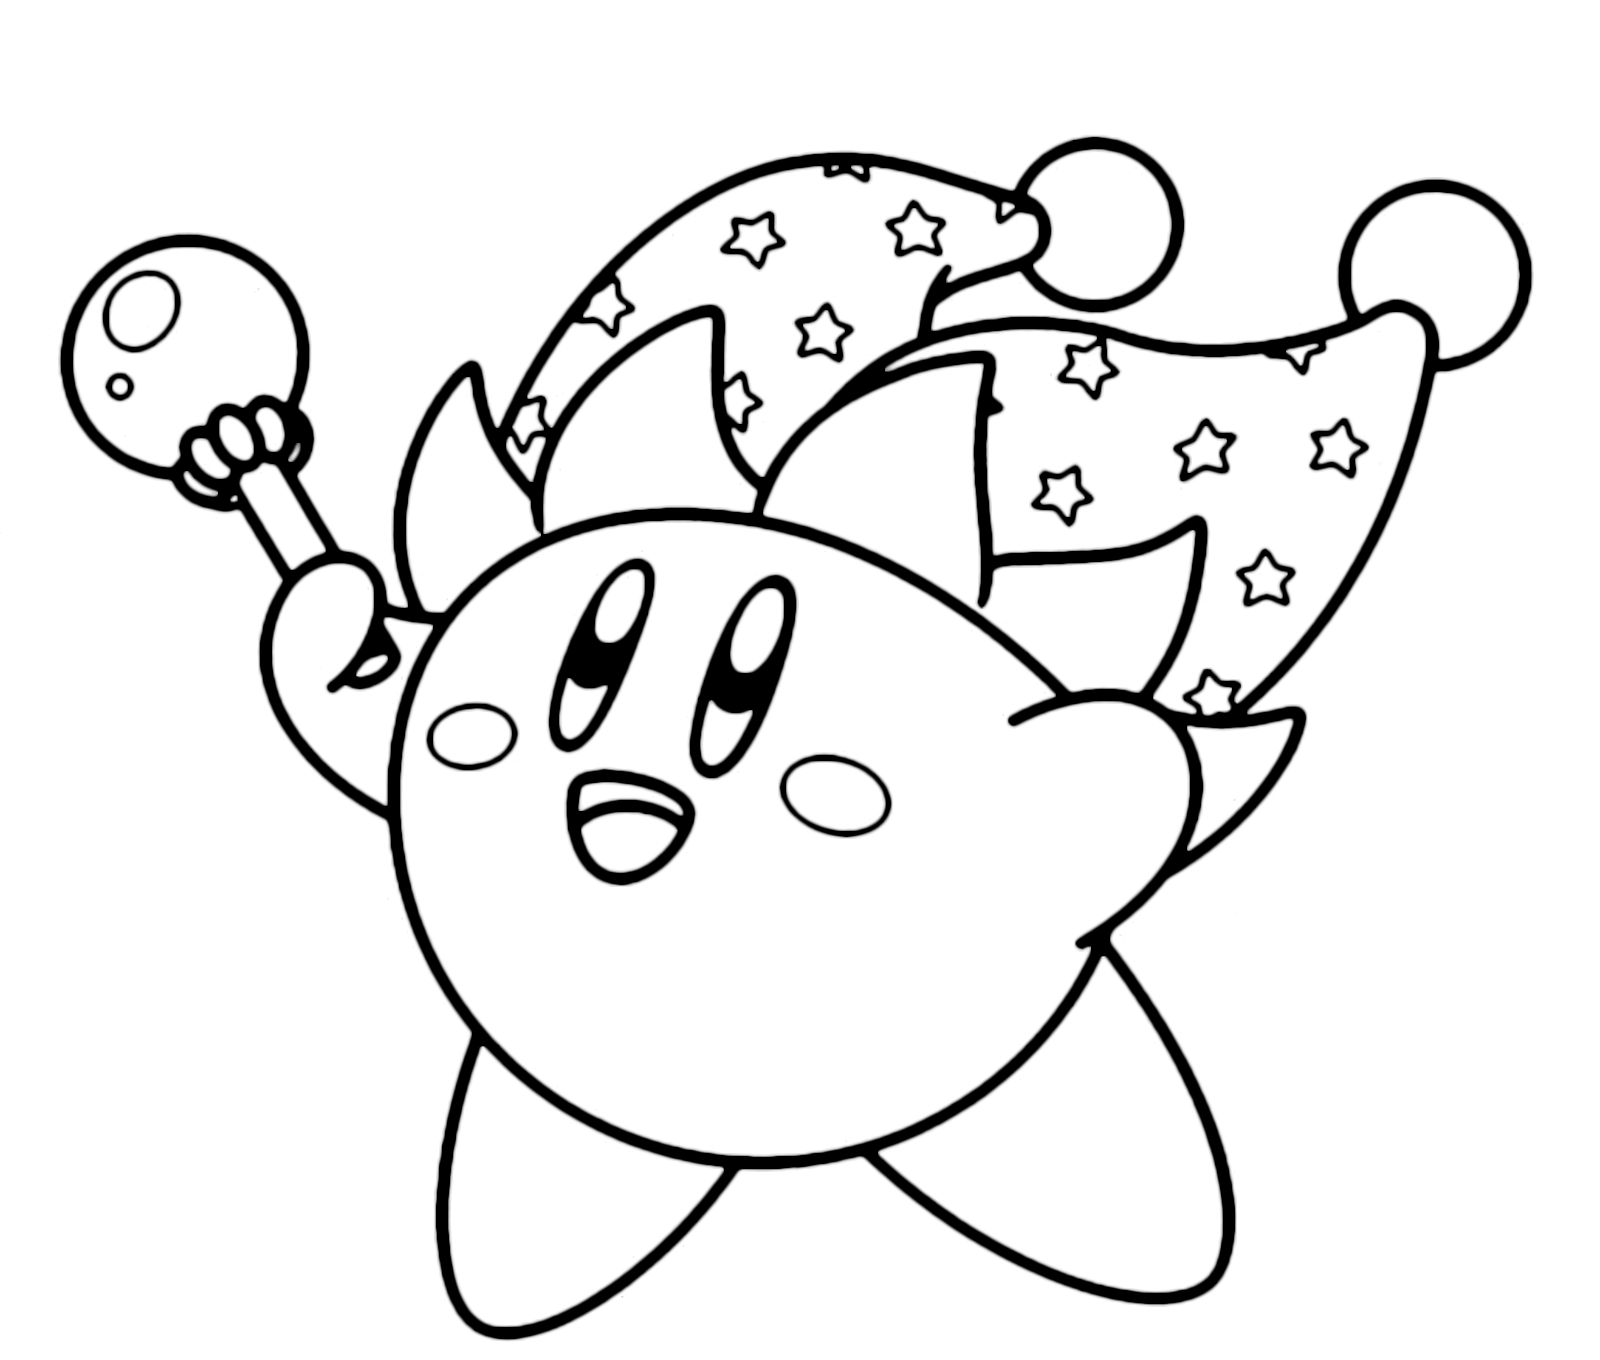 Kirby Coloring Pages To Print Coloring Pages Kleurplaten